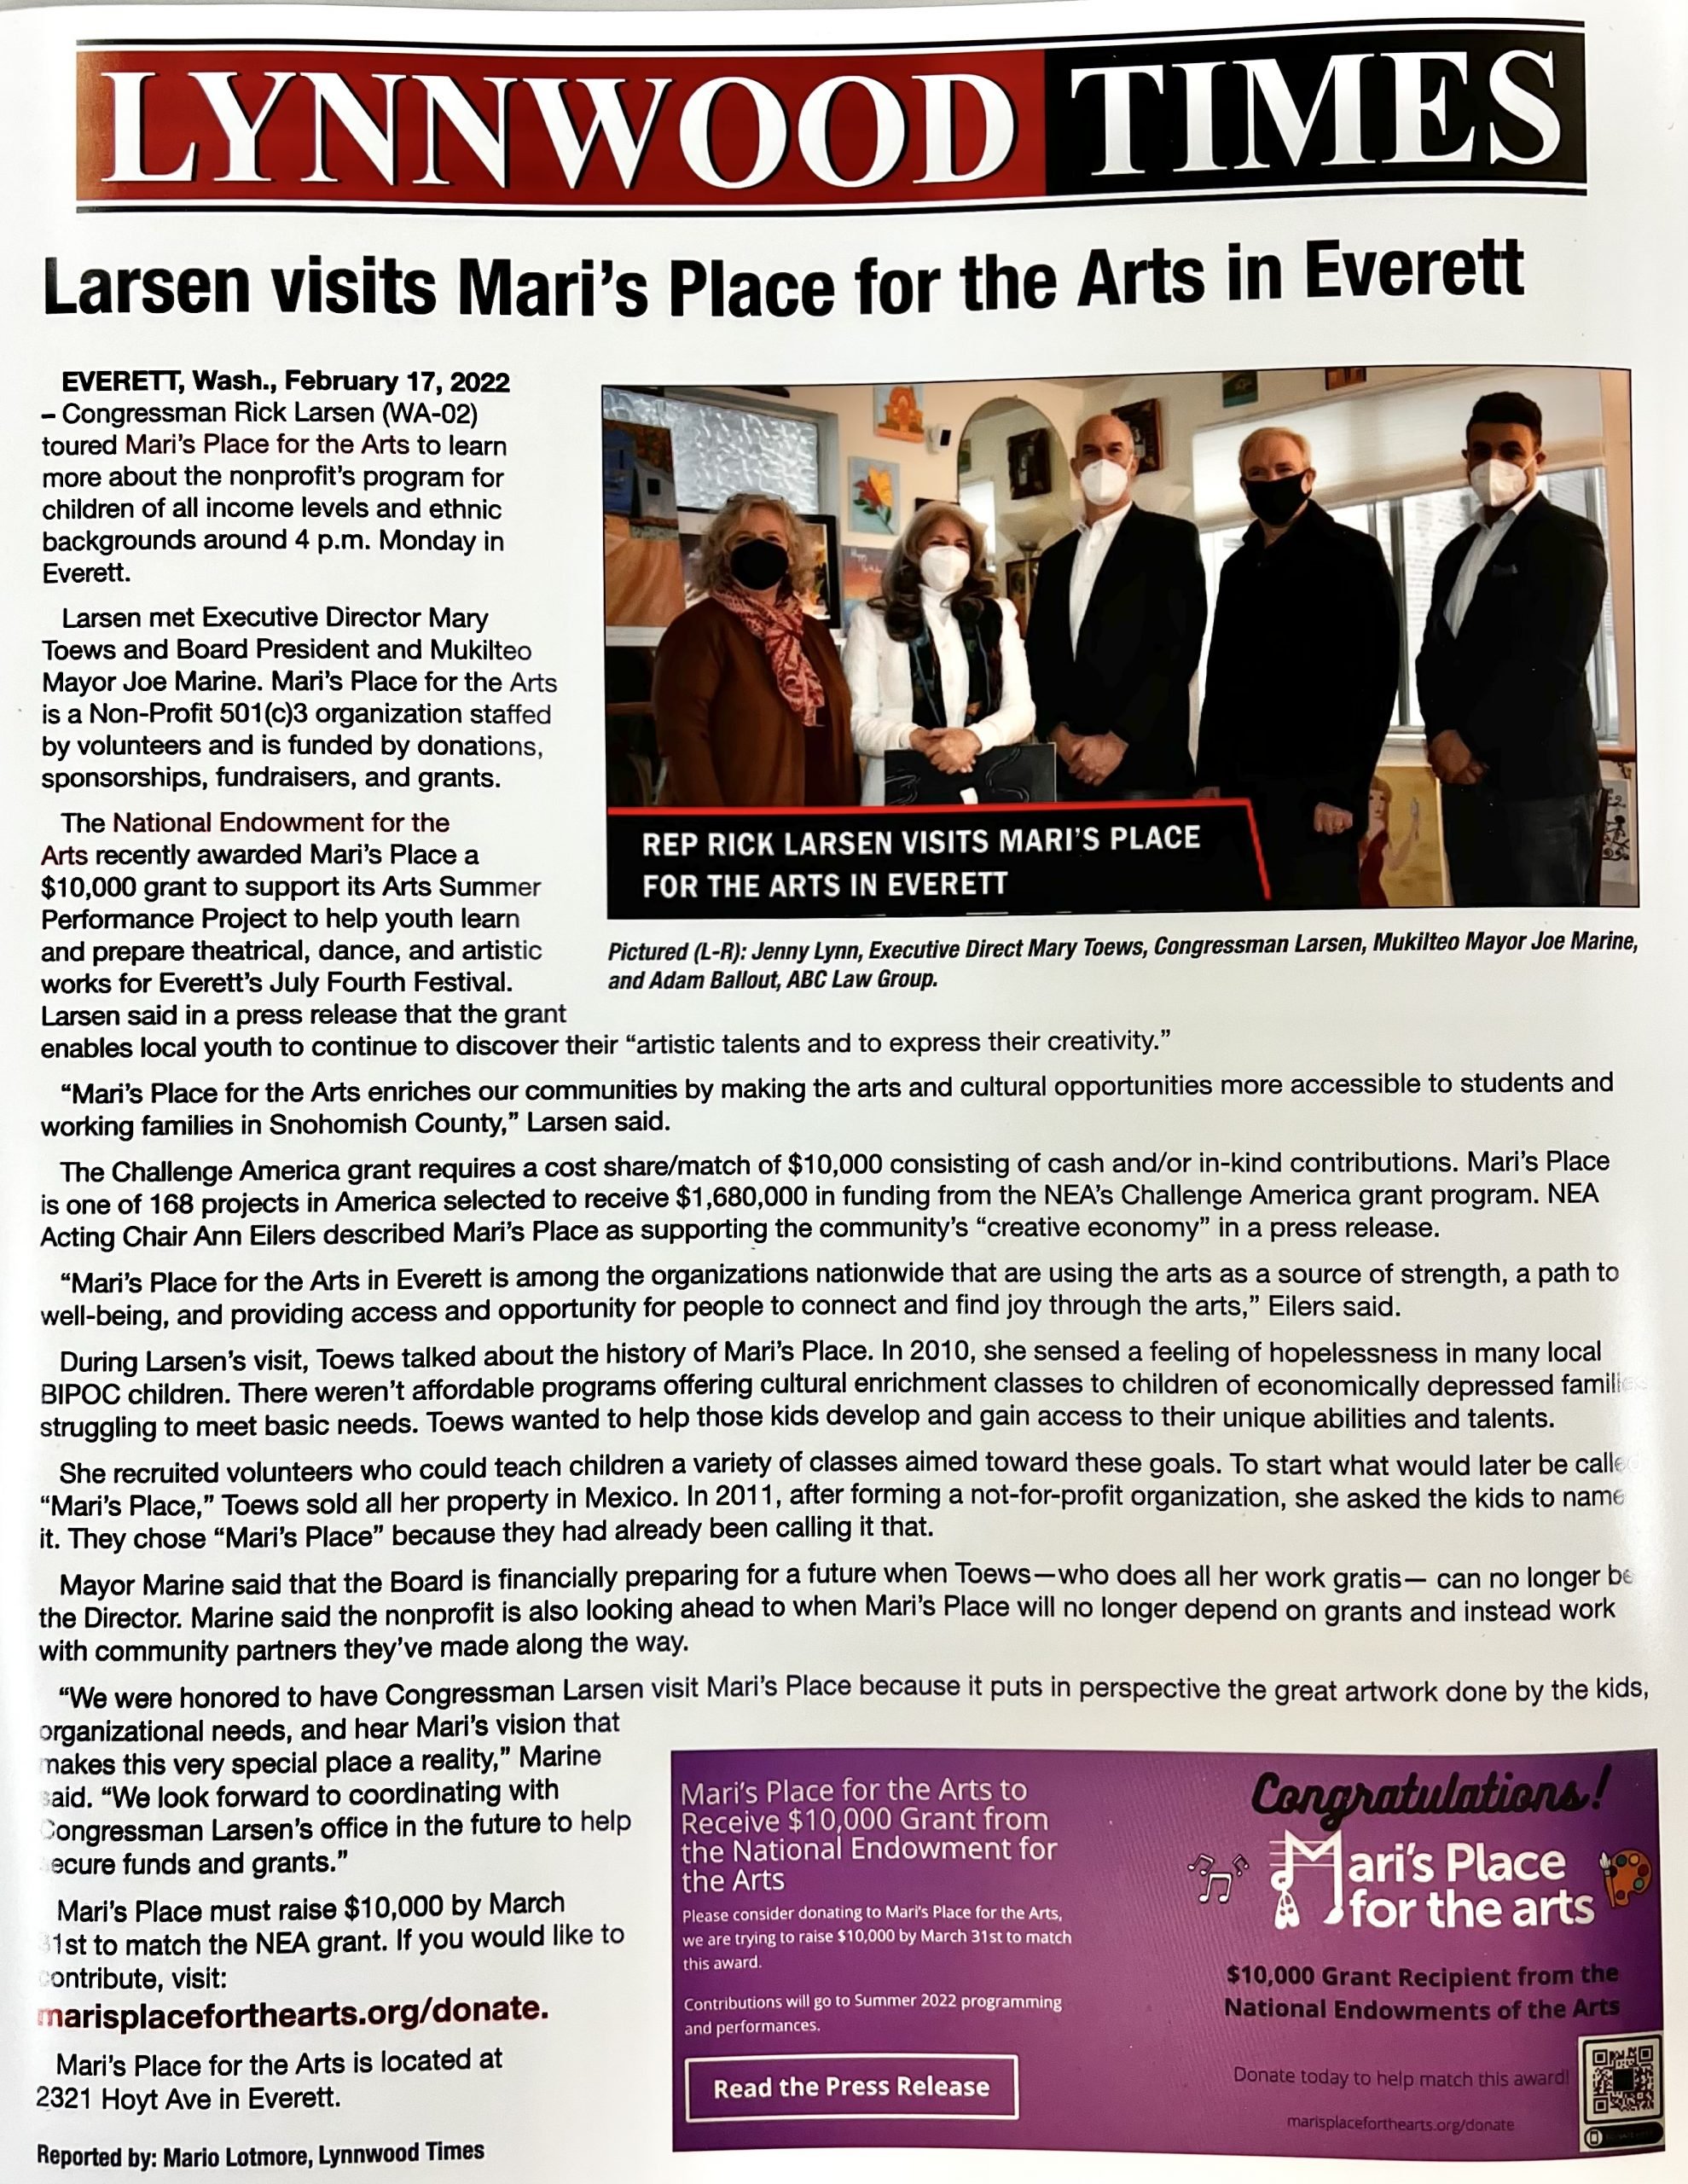 Larsen visits Mari’s Place for the Arts in Everett